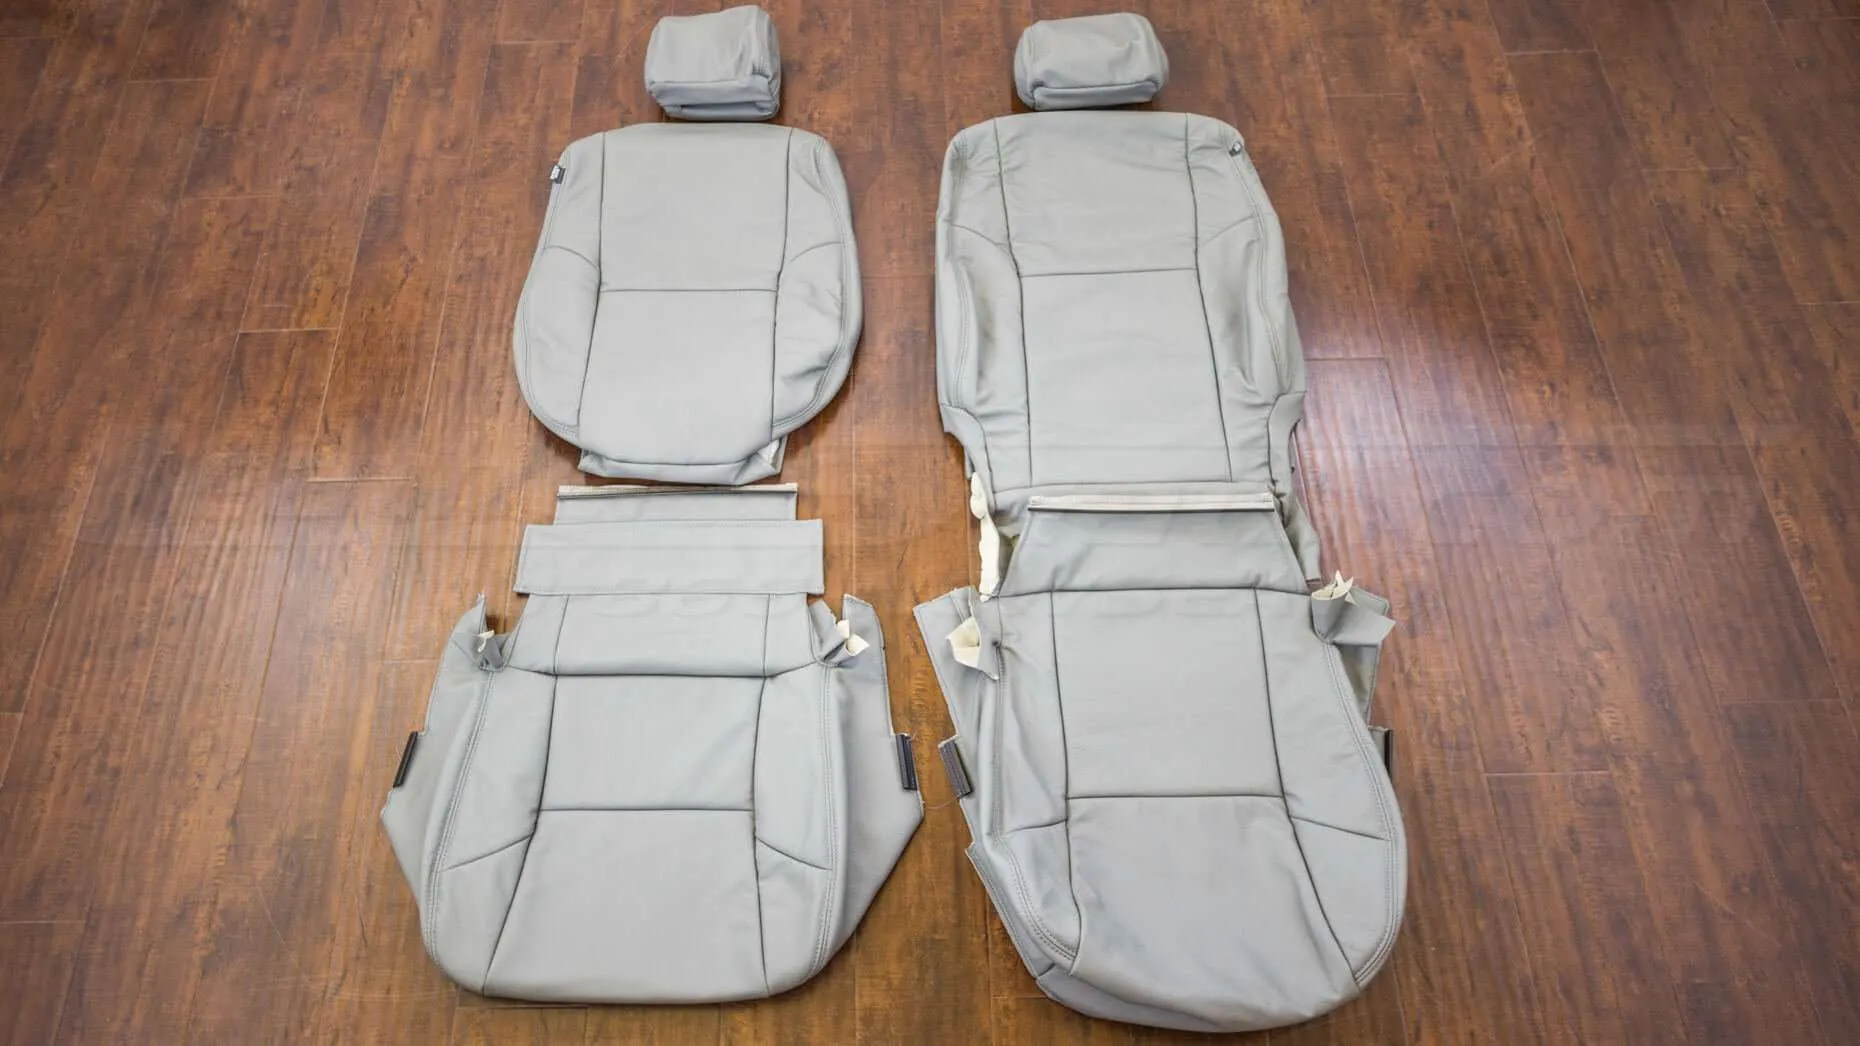 2012-2015 Toyota Tacoma Leather Upholstery Kit - Ice Grey - Front seat upholstery